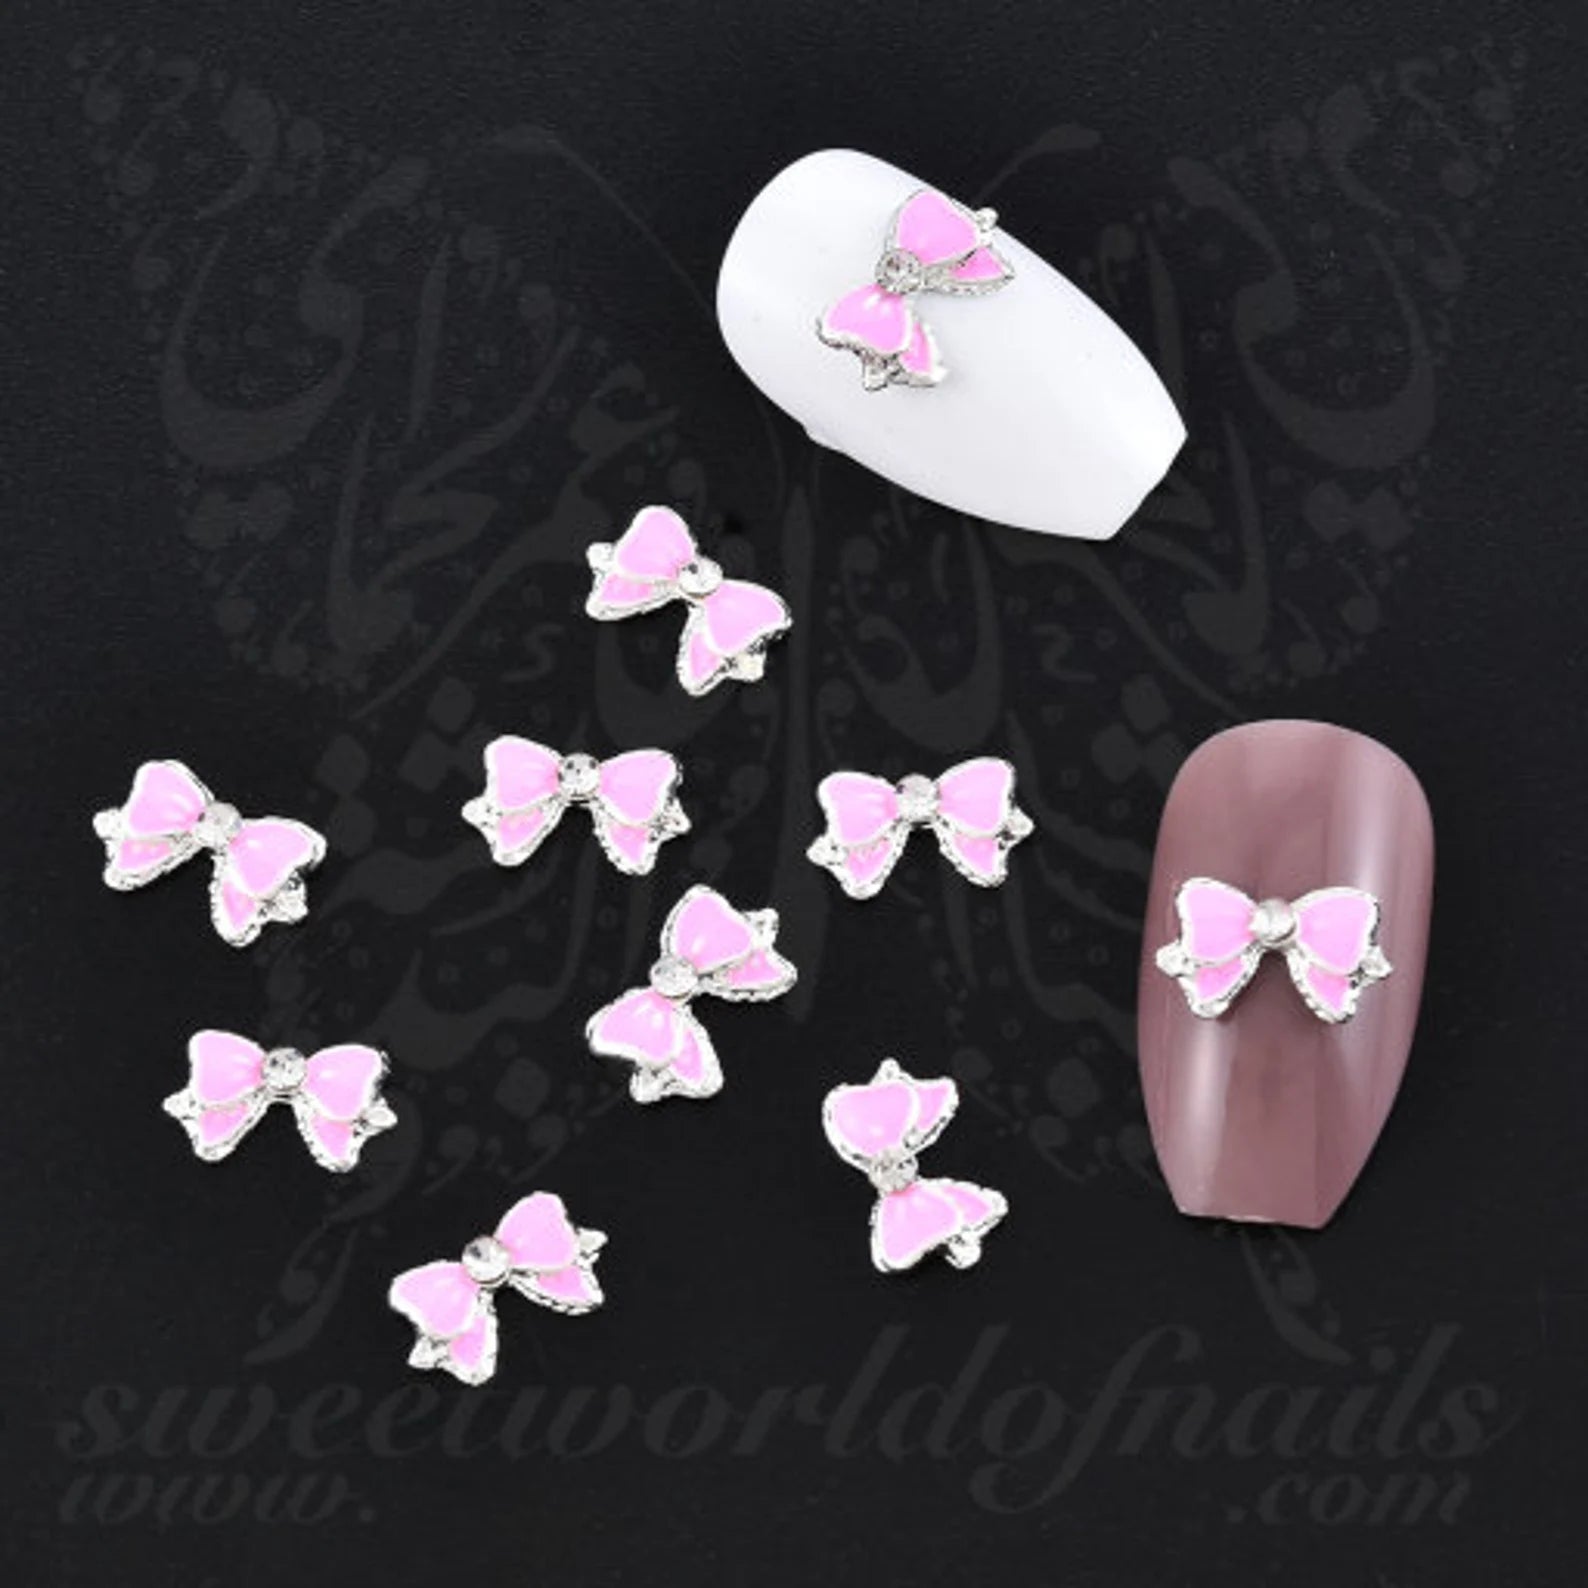 Butterfly Bowknot Bears 3D Nail Art Drills Bow Nail Decorations Nail  Rhinestones Nail Art Jewelry – the best products in the Joom Geek online  store